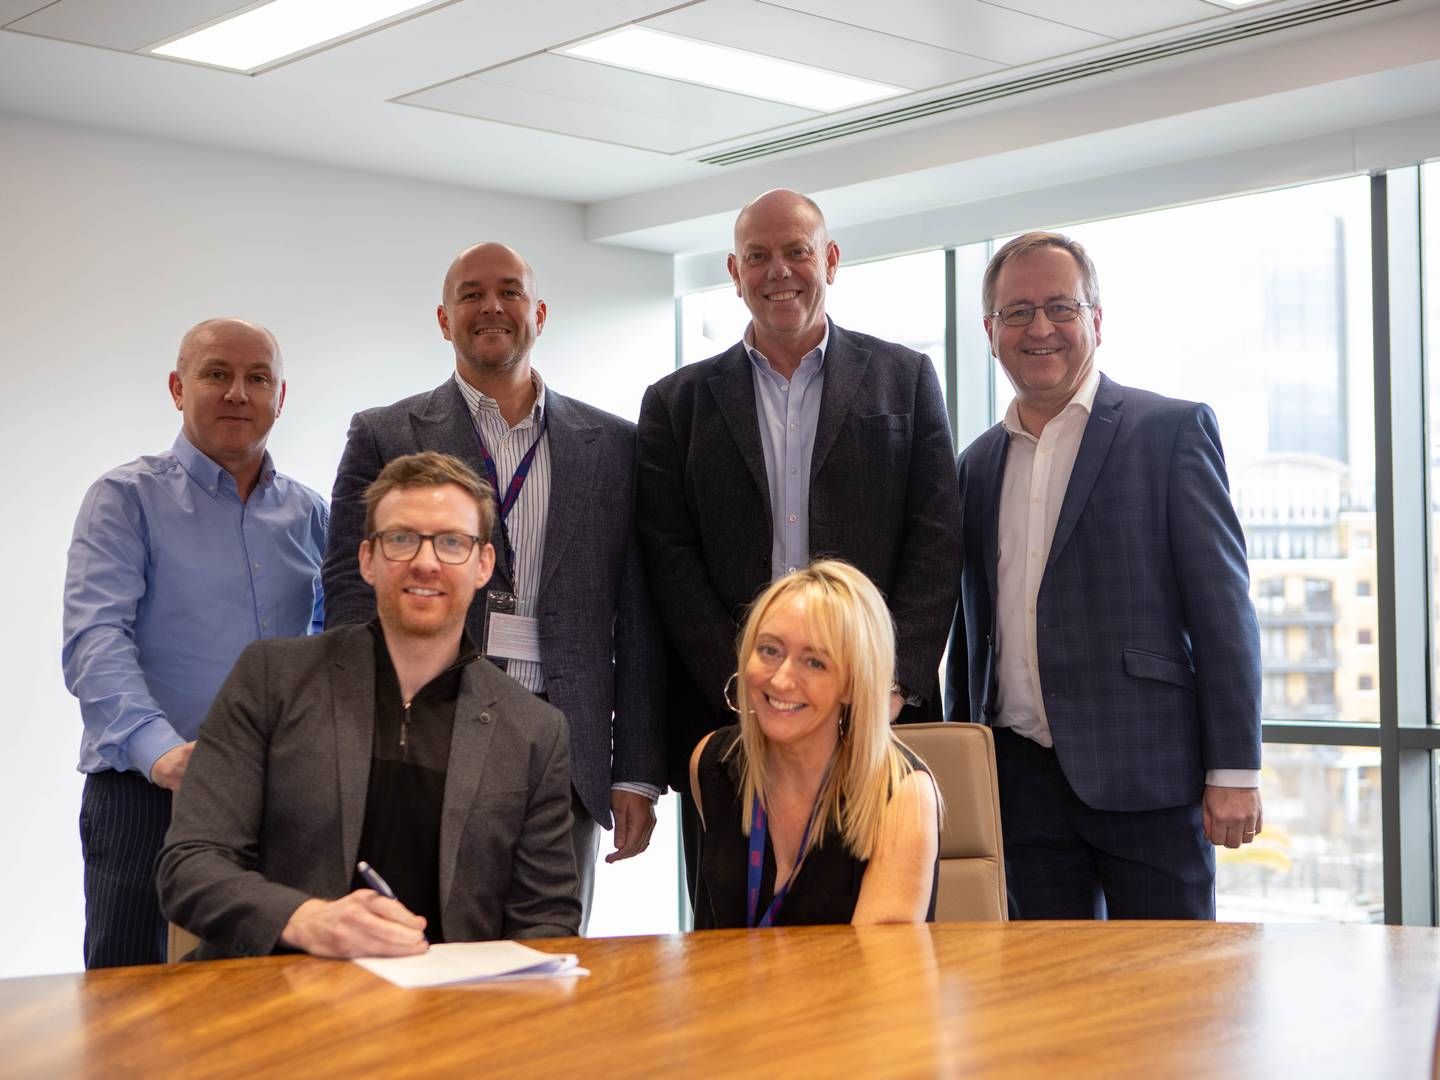 The deal was signed this week by Clarksons and Trauma Resus. | Photo: Clarksons